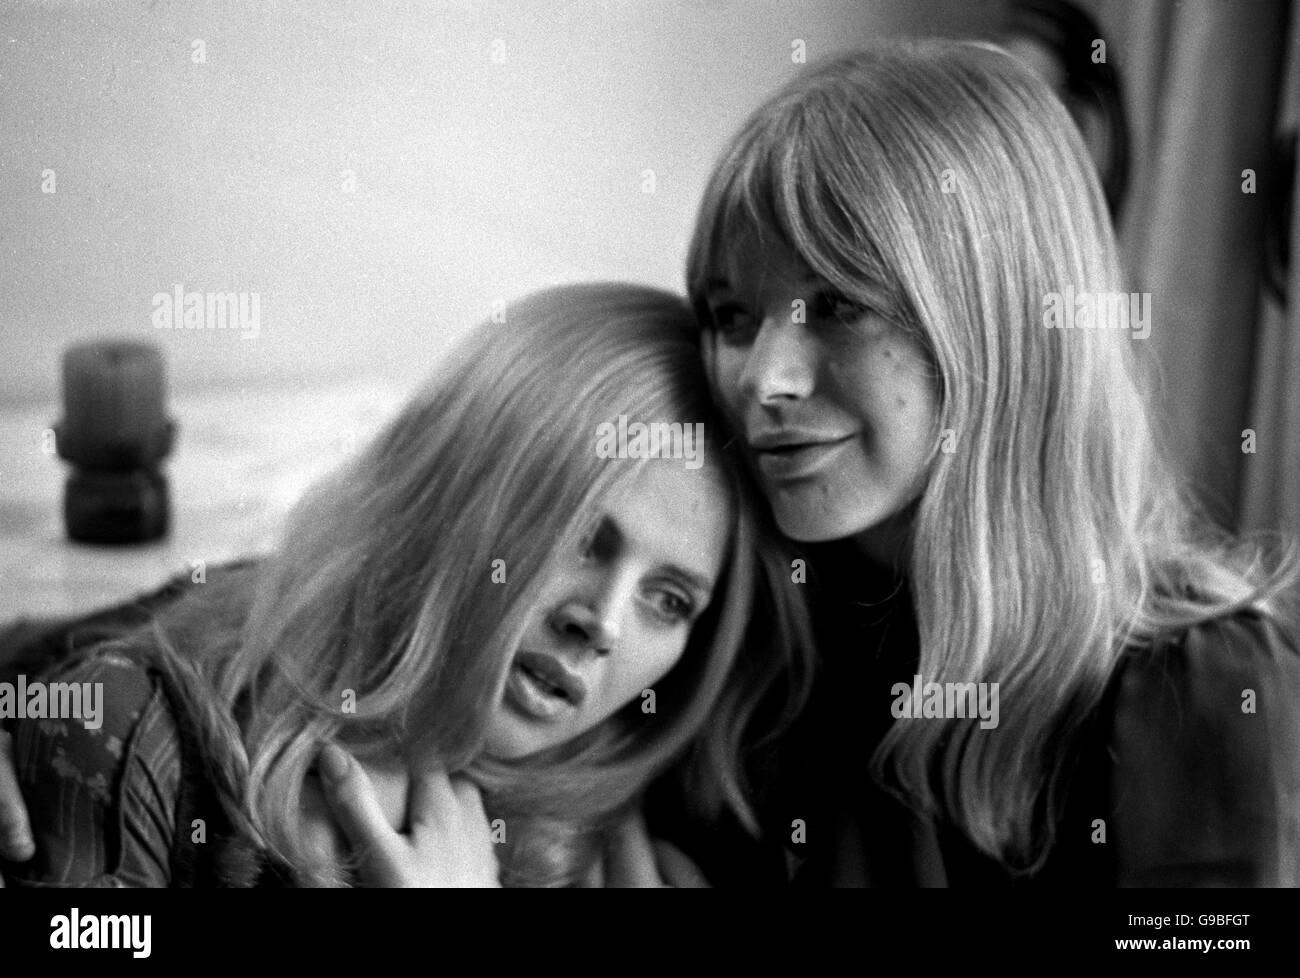 Britt Ekland (left) and Marianne Faithfull rehearsing in Britt's flat for their parts in August Stringberg's powerful drama 'The Stronger' in which both are in love with the same man, one his wife, the other his mistress. Stock Photo